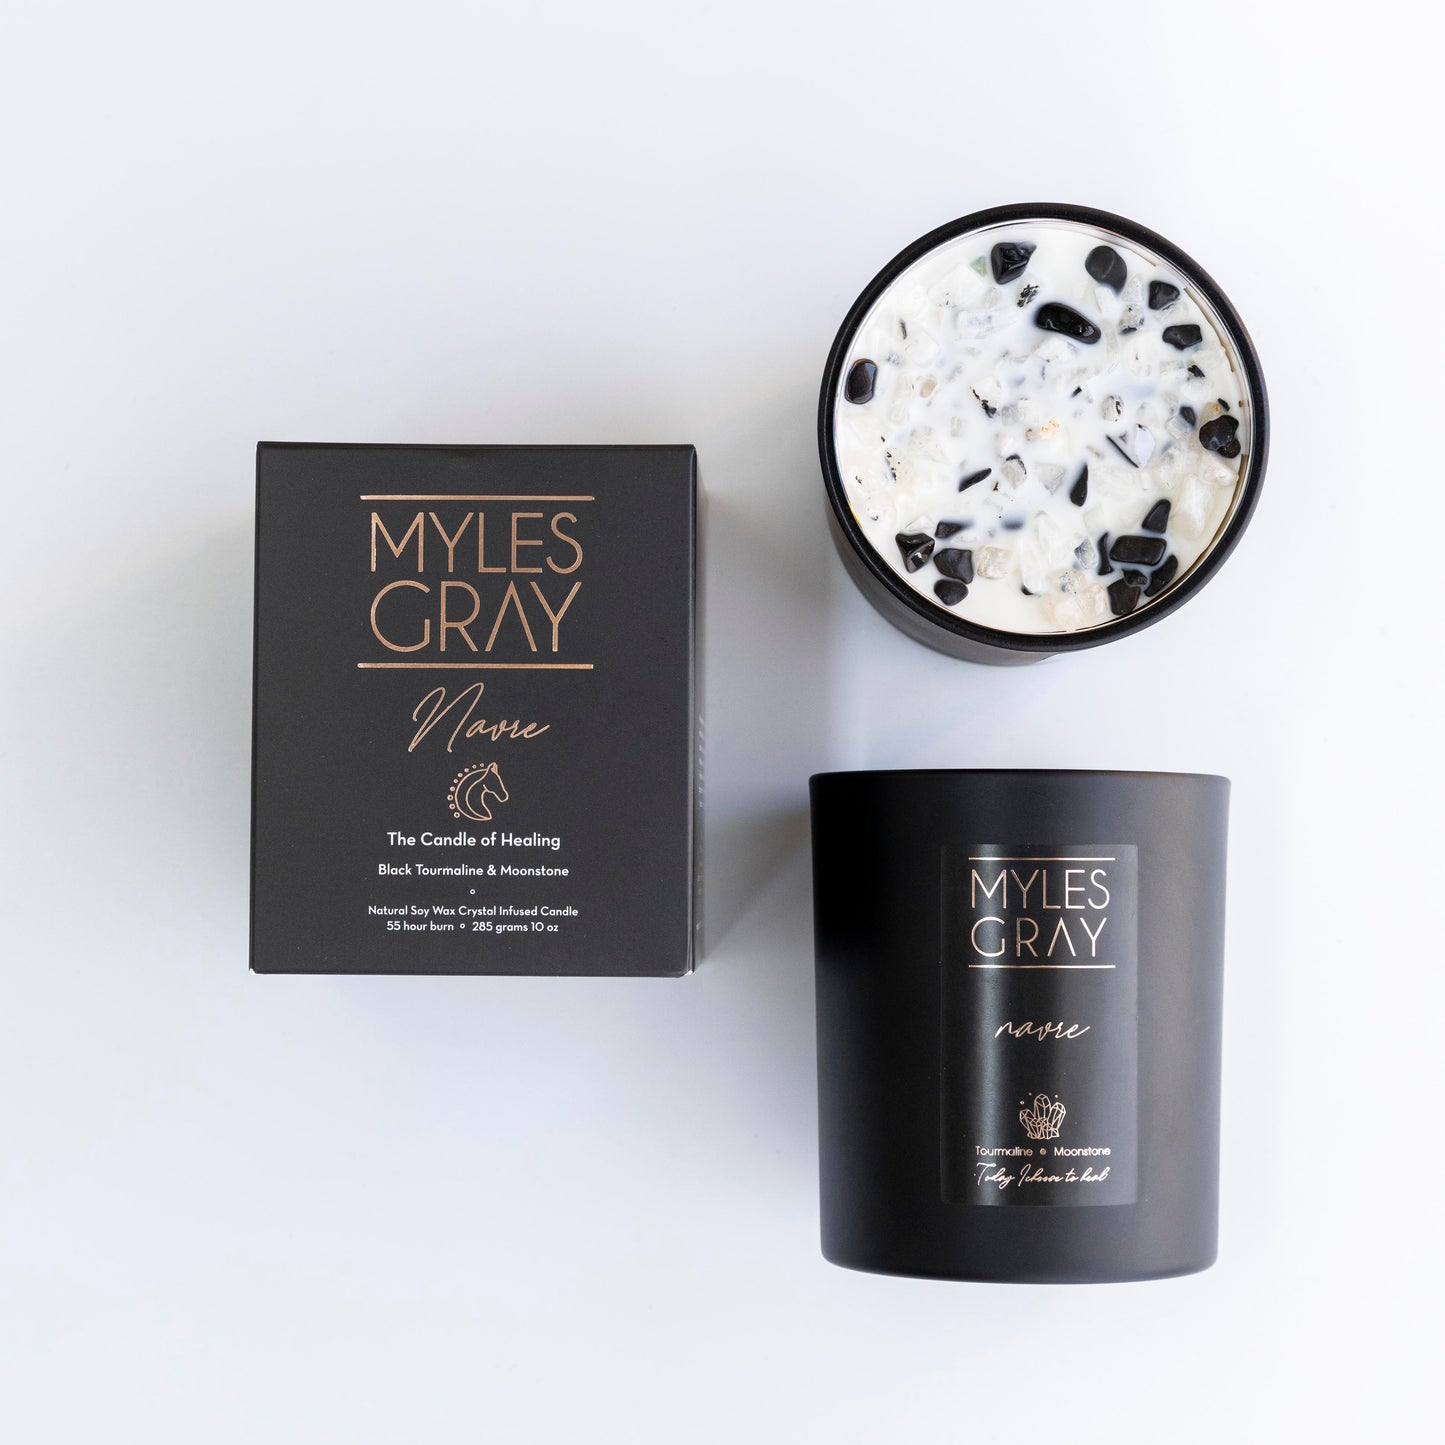 Myles Gray Navre Candle Of Healing